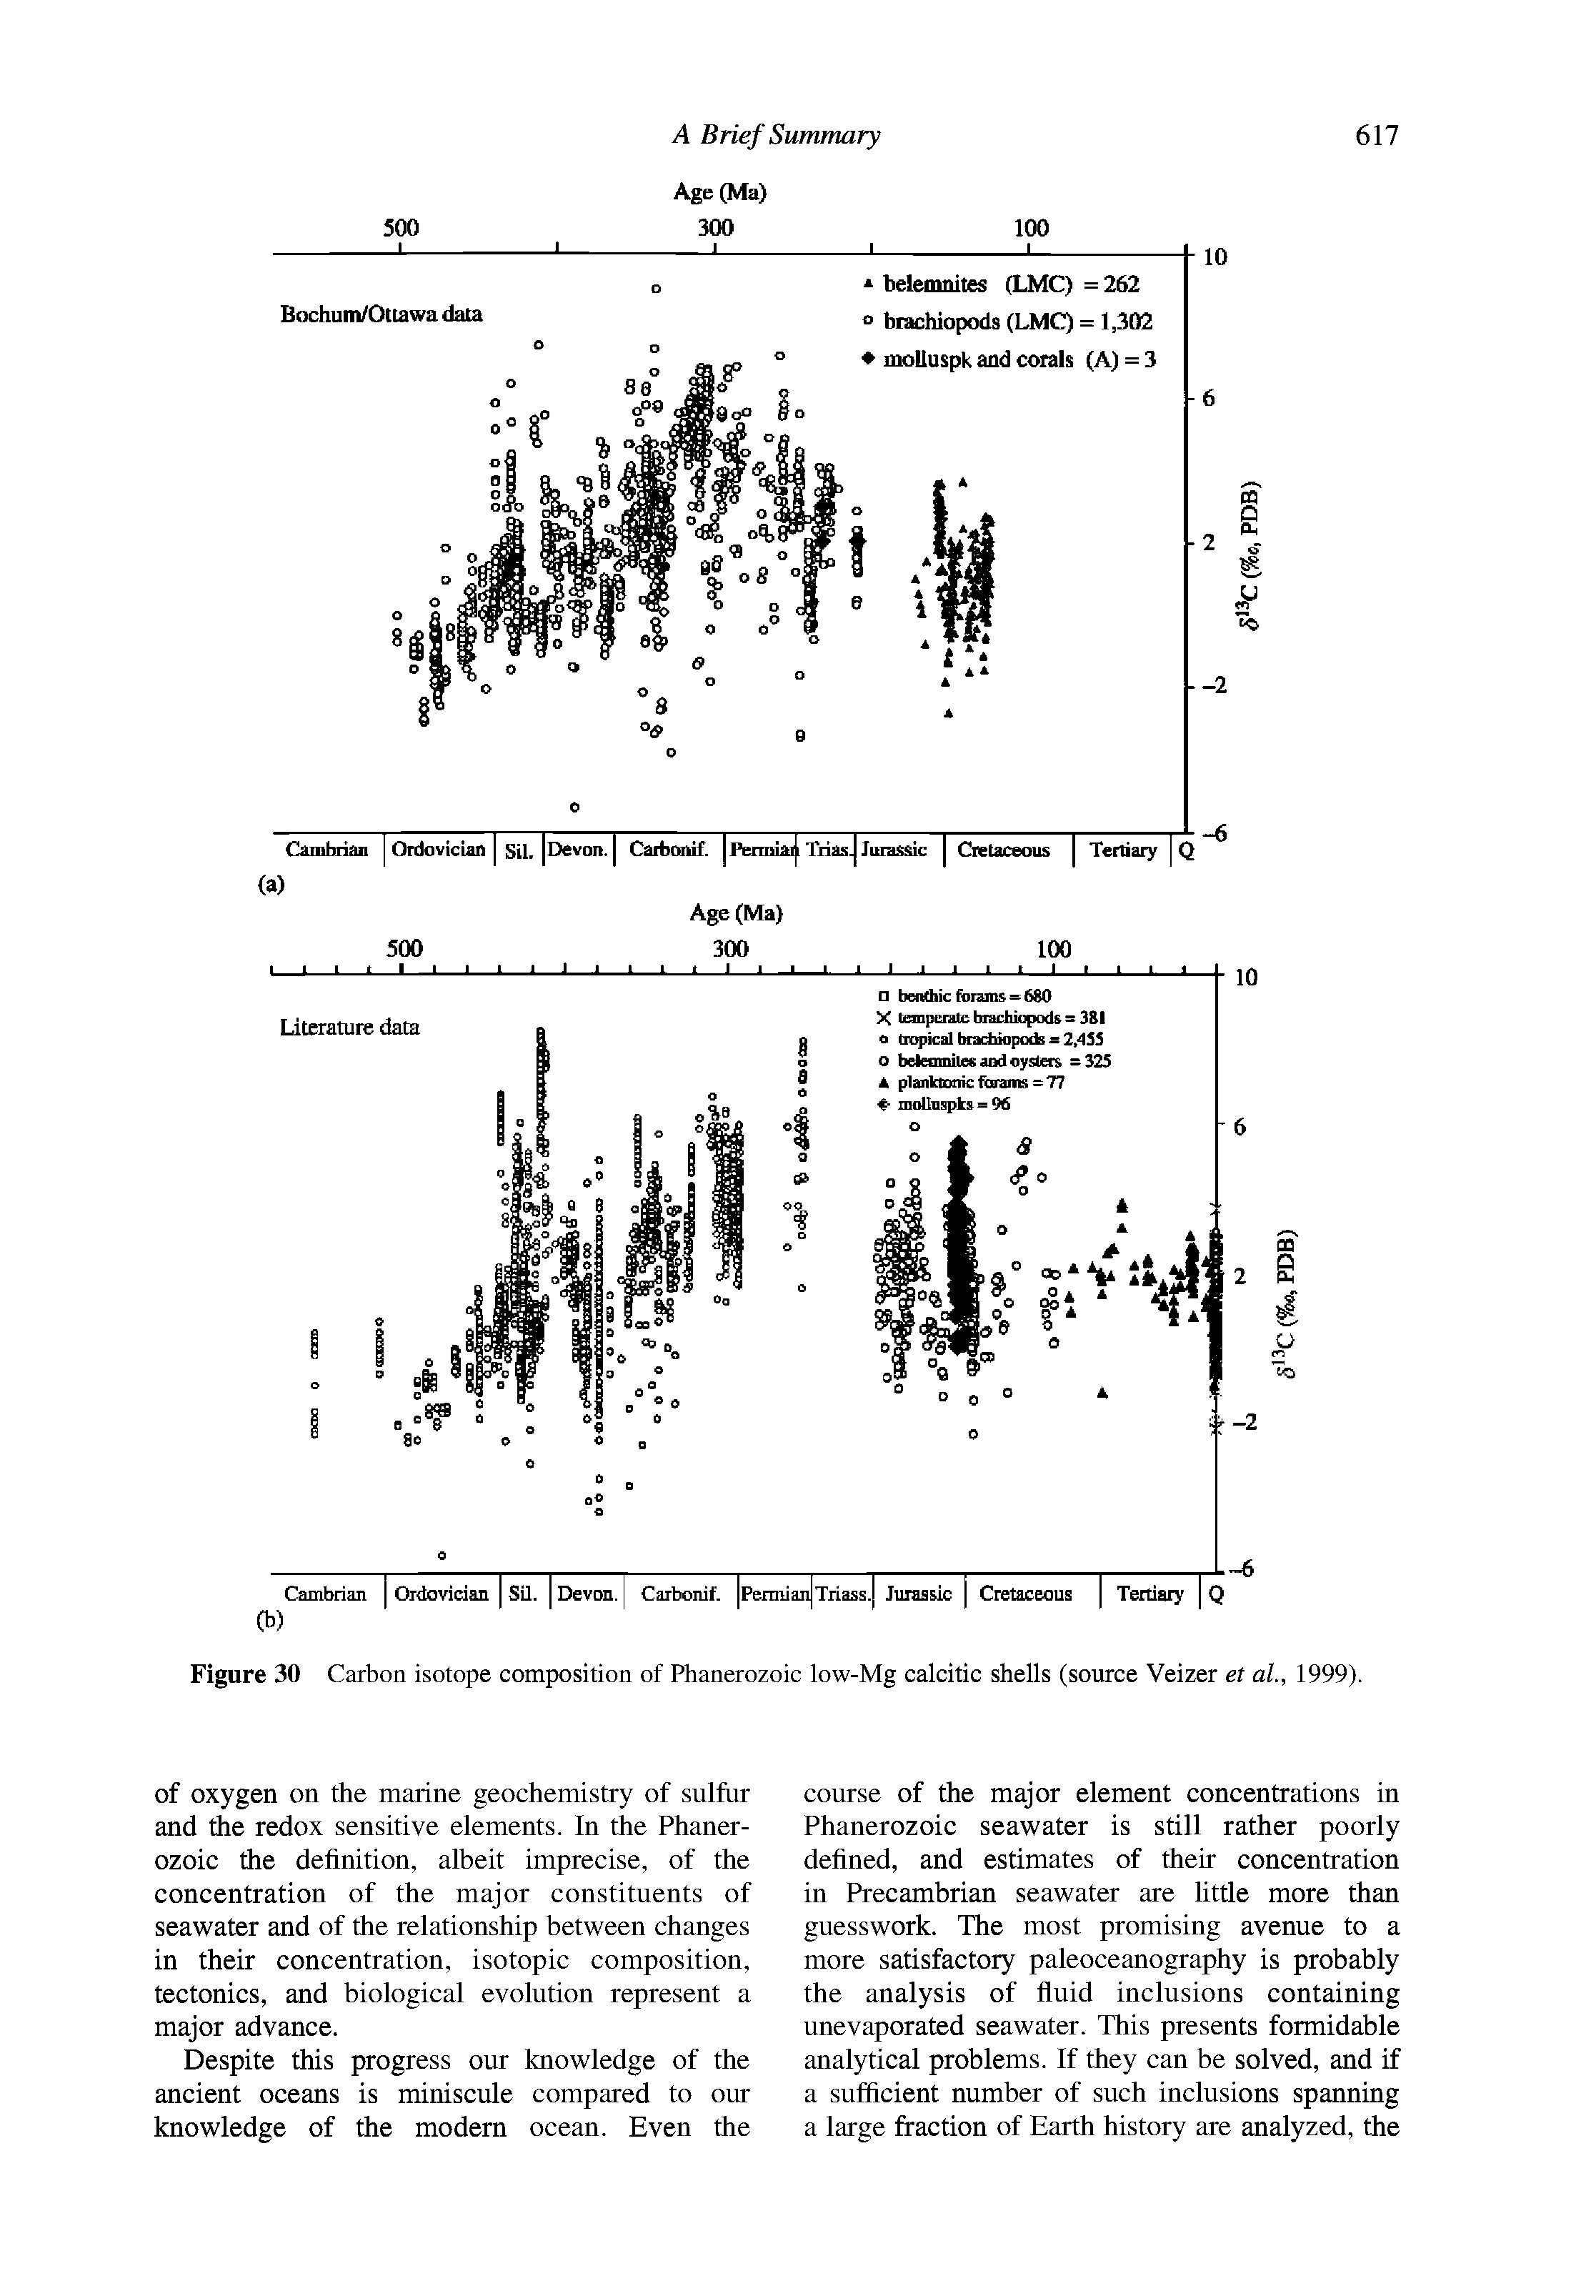 Figure 30 Carbon isotope composition of Phanerozoic low-Mg calcitic shells (source Veizer et al, 1999).